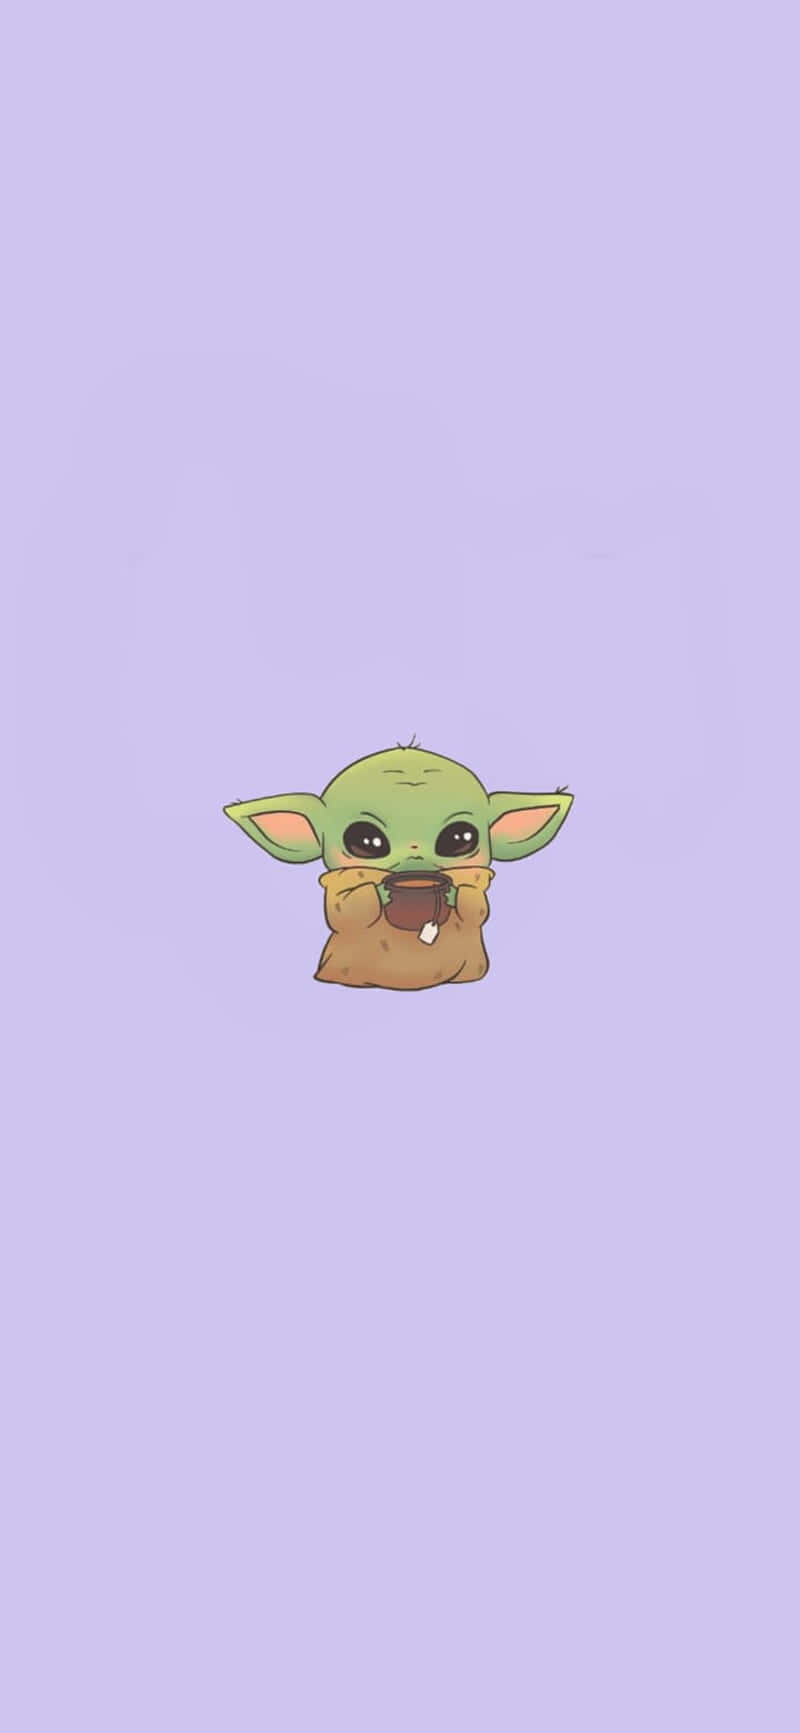 Cartoon Yoda - The Wise and Witty Jedi Wallpaper